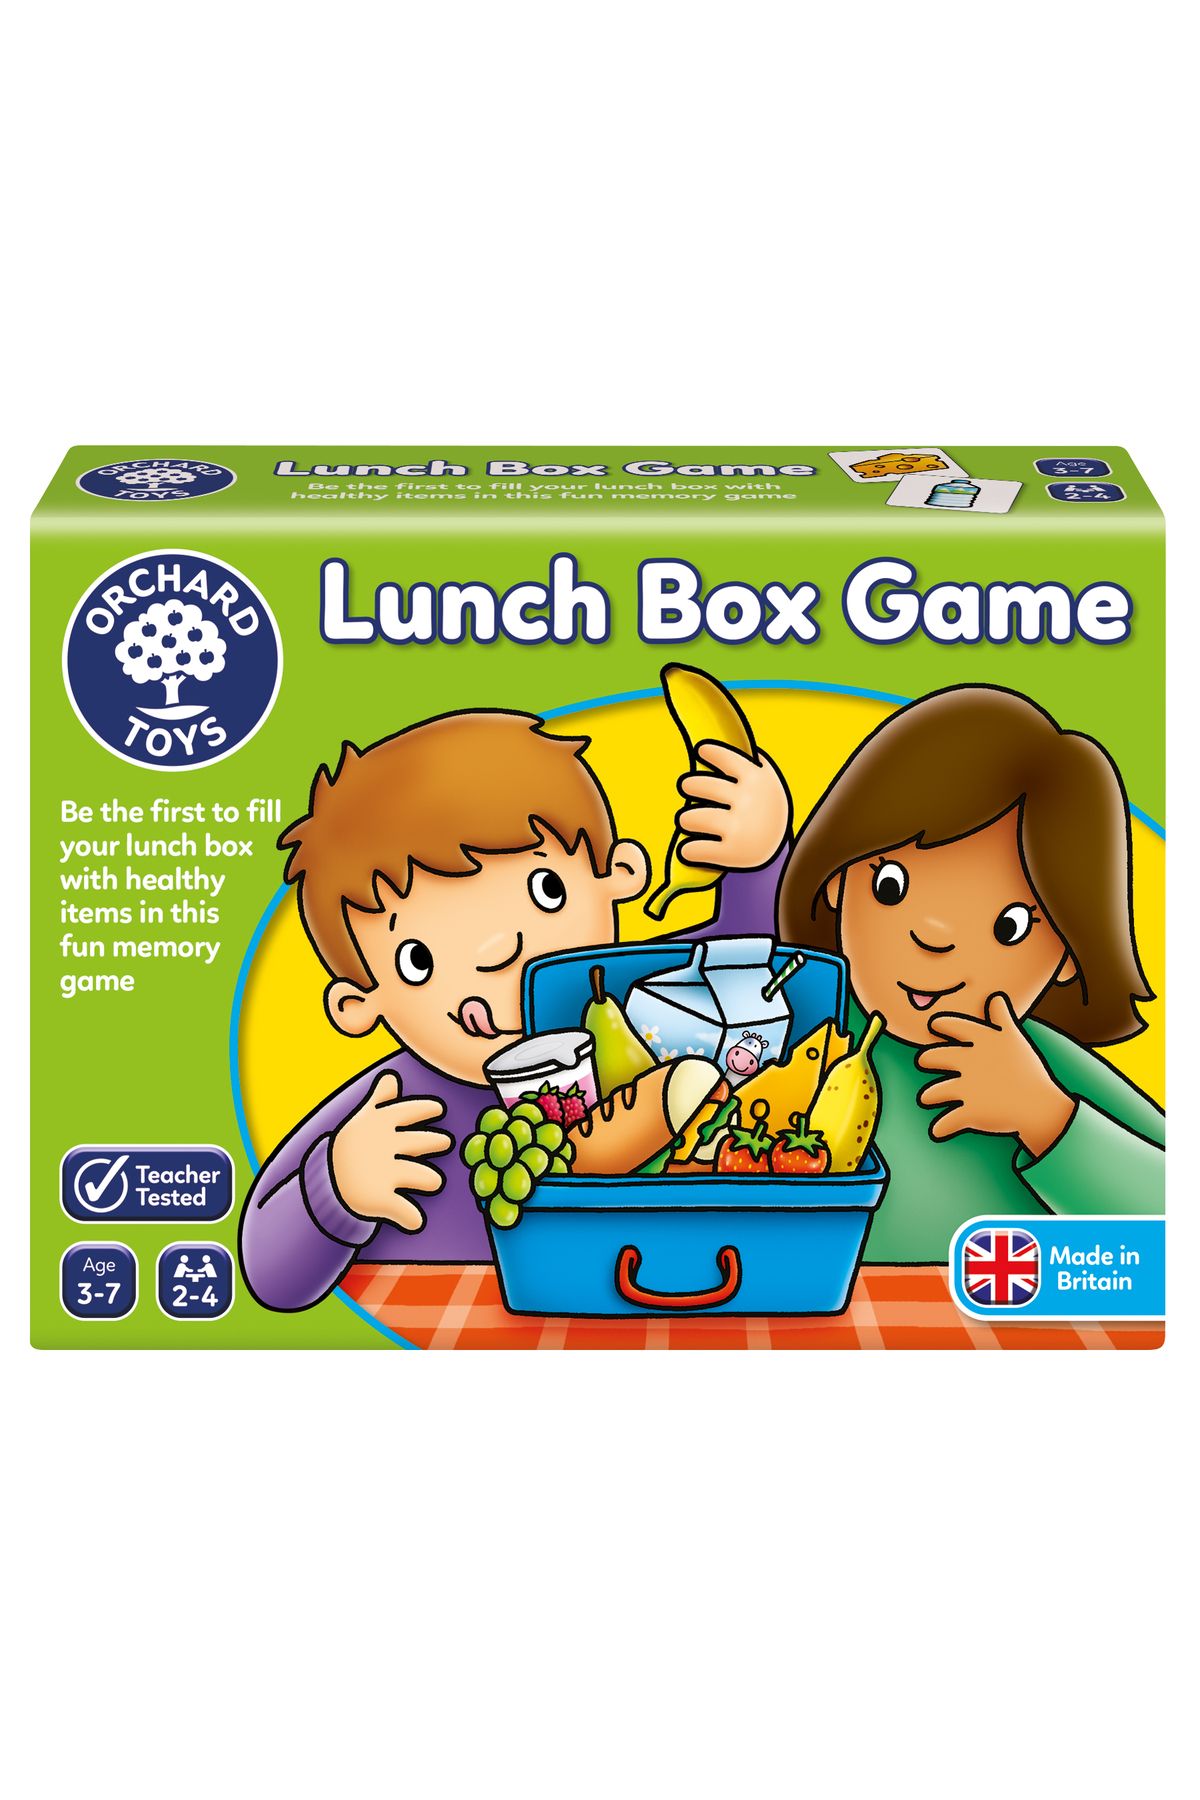 ORCHARD Lunchbox